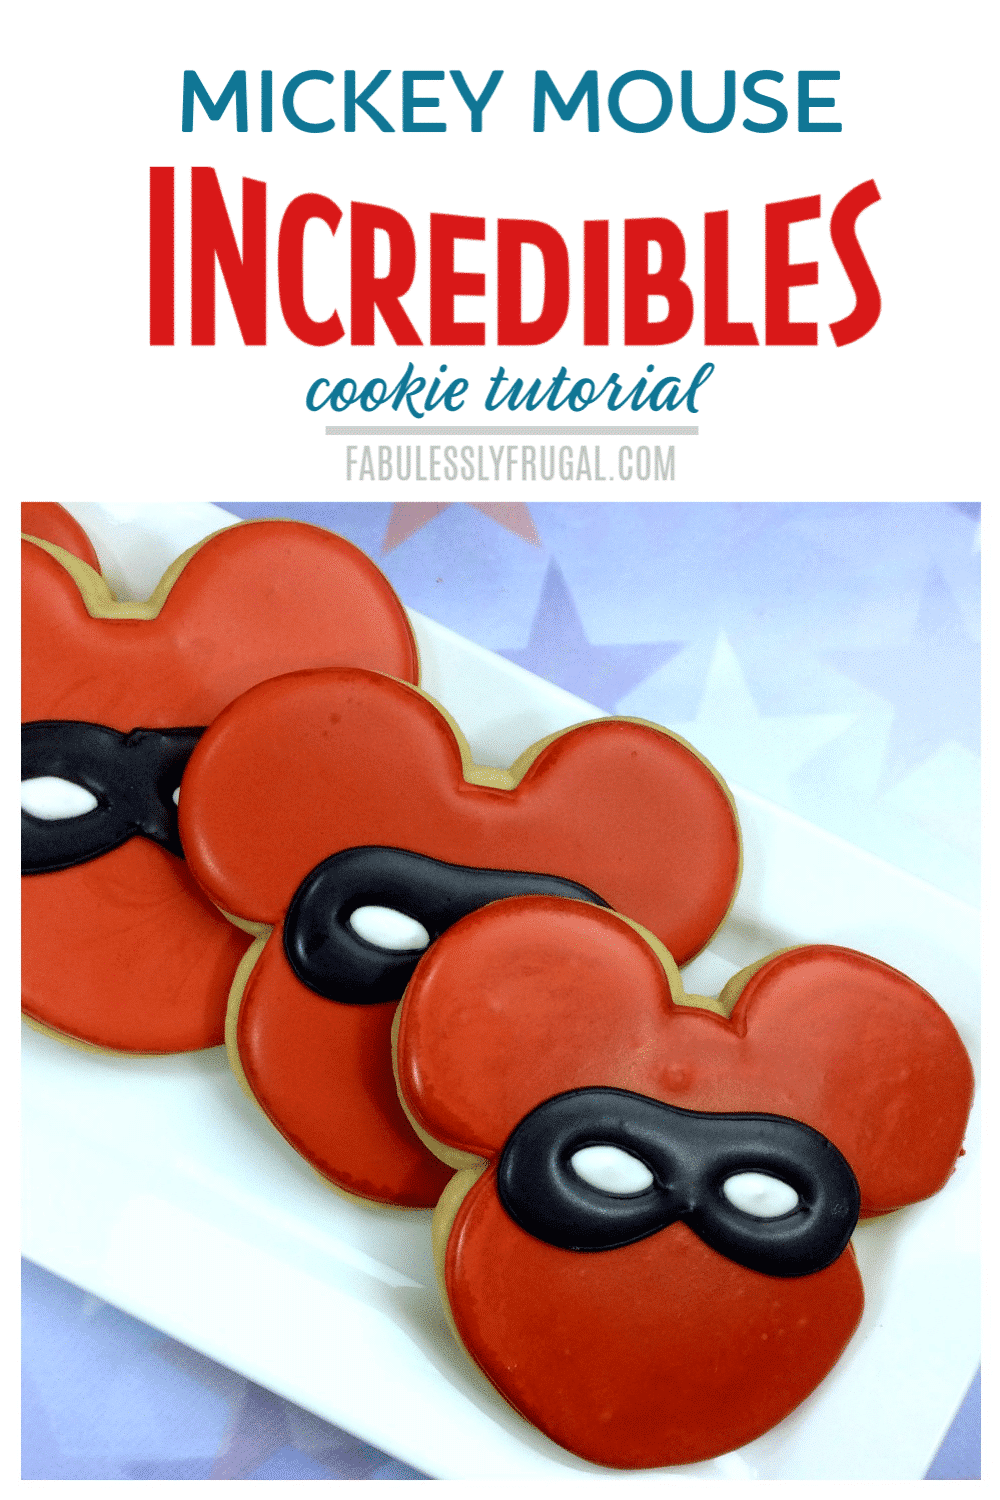 Mickey mouse sugar cookies with an incredibles twist